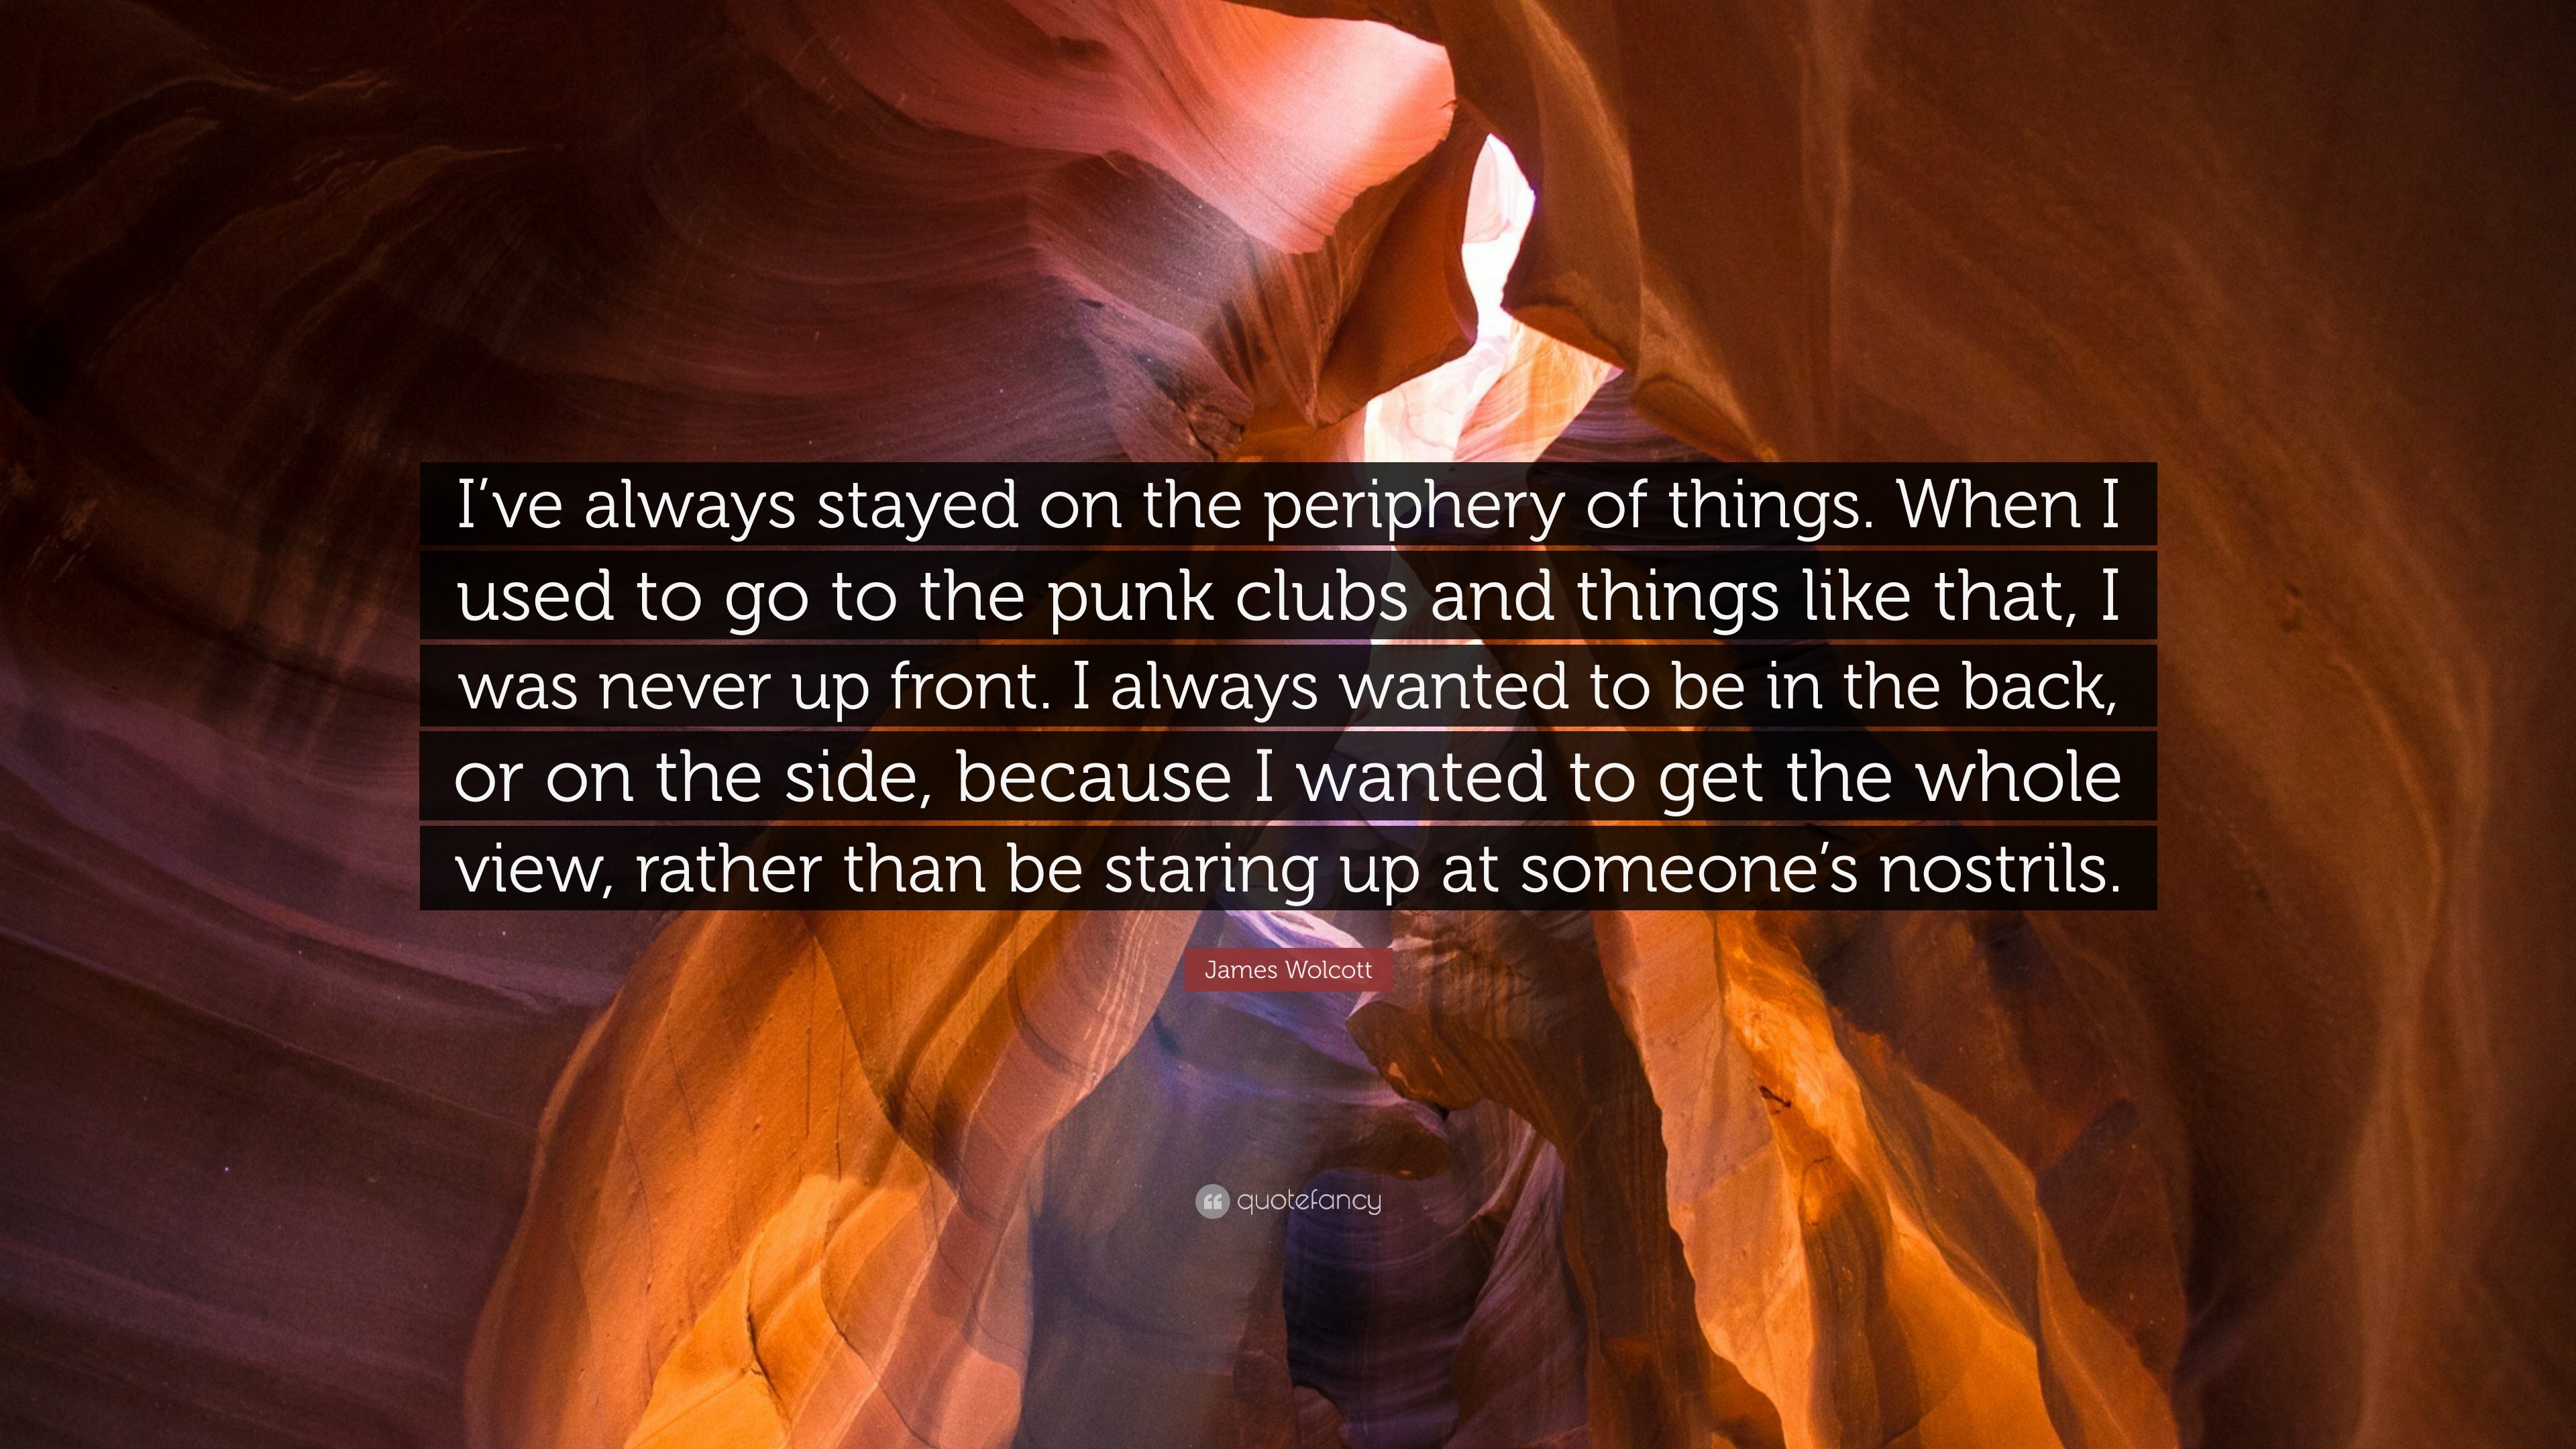 James Wolcott Quote: "I've always stayed on the periphery of thin...